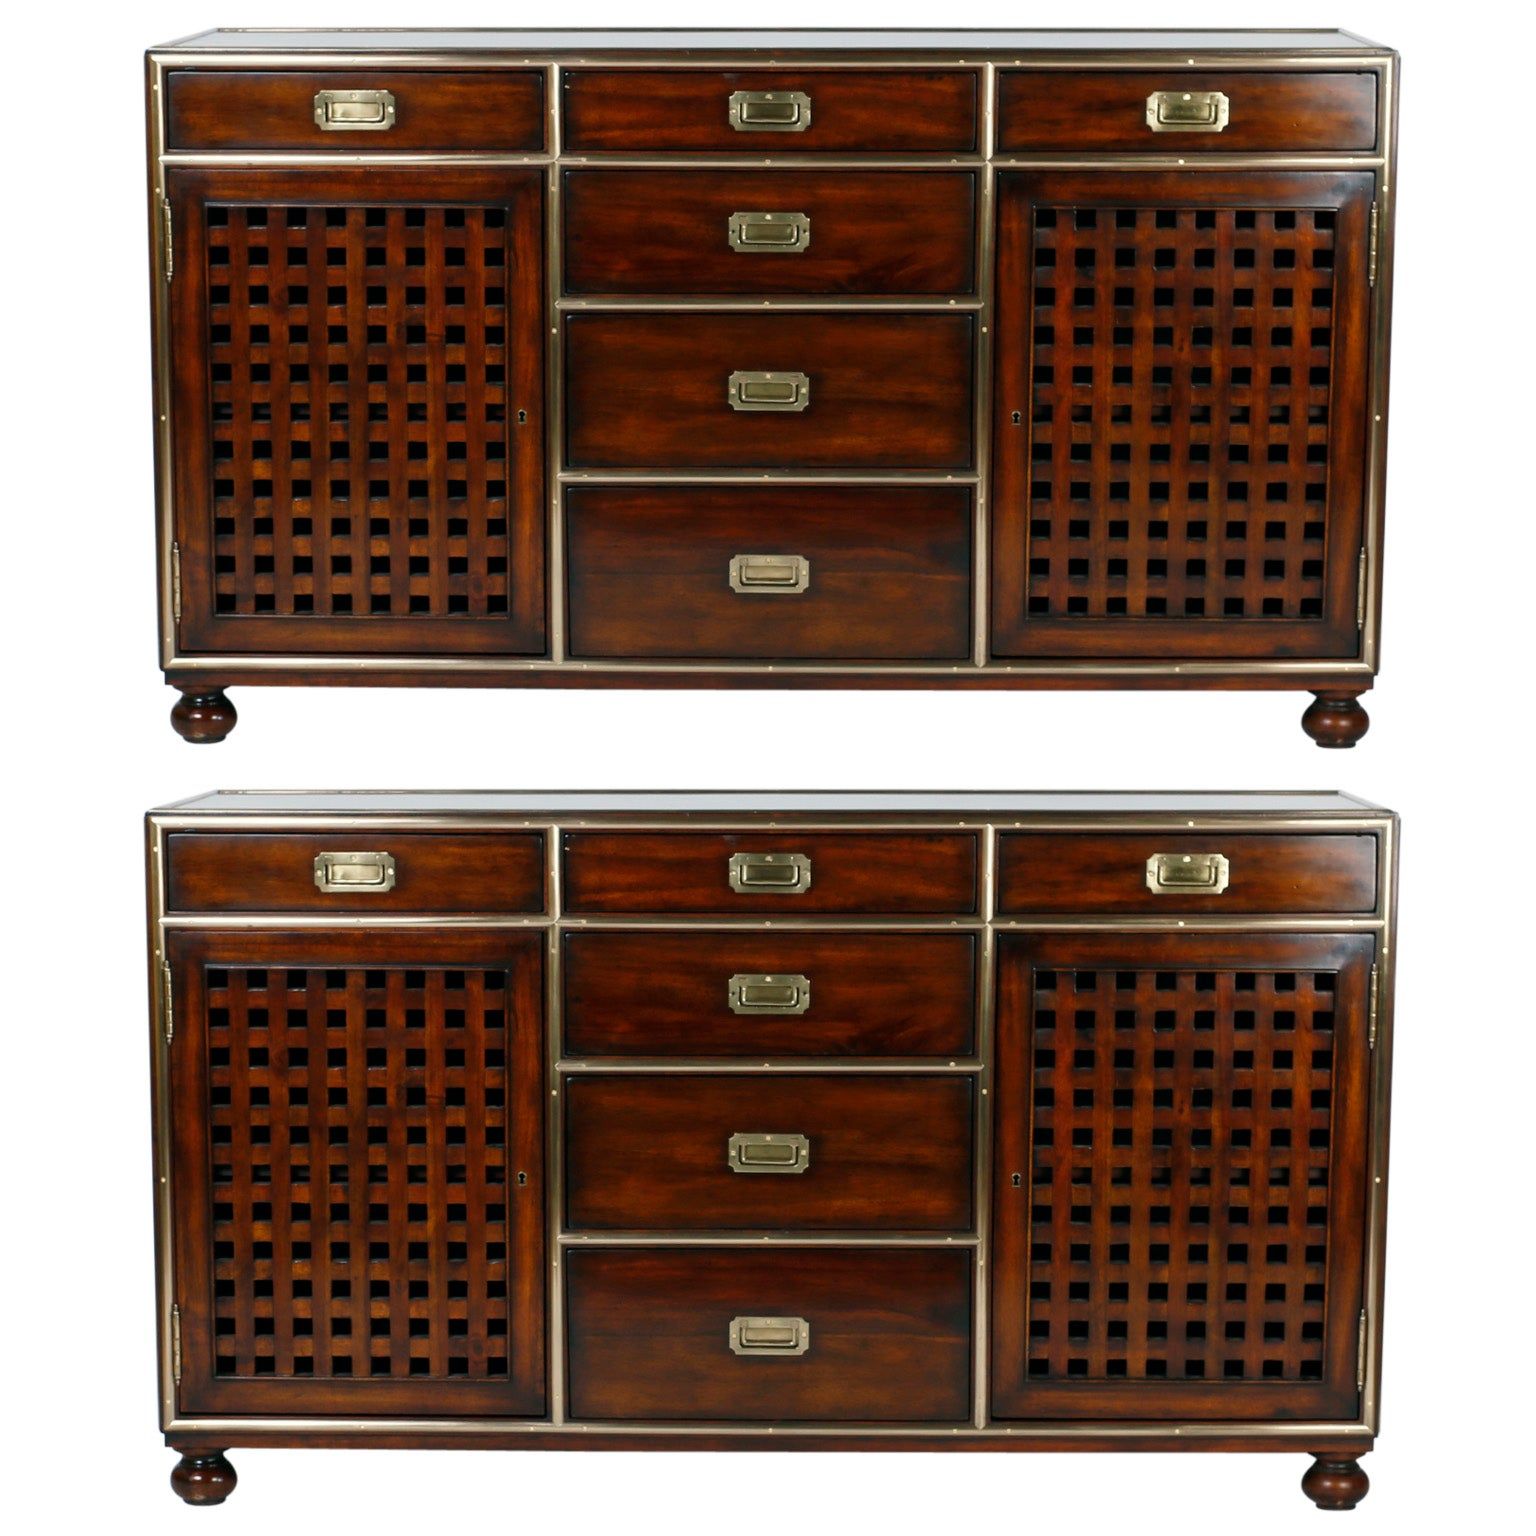 Pair Of Campaign Style Credenzas Or Cabinets At 1stdibs Intended For Beach Stripes Credenzas (View 30 of 30)